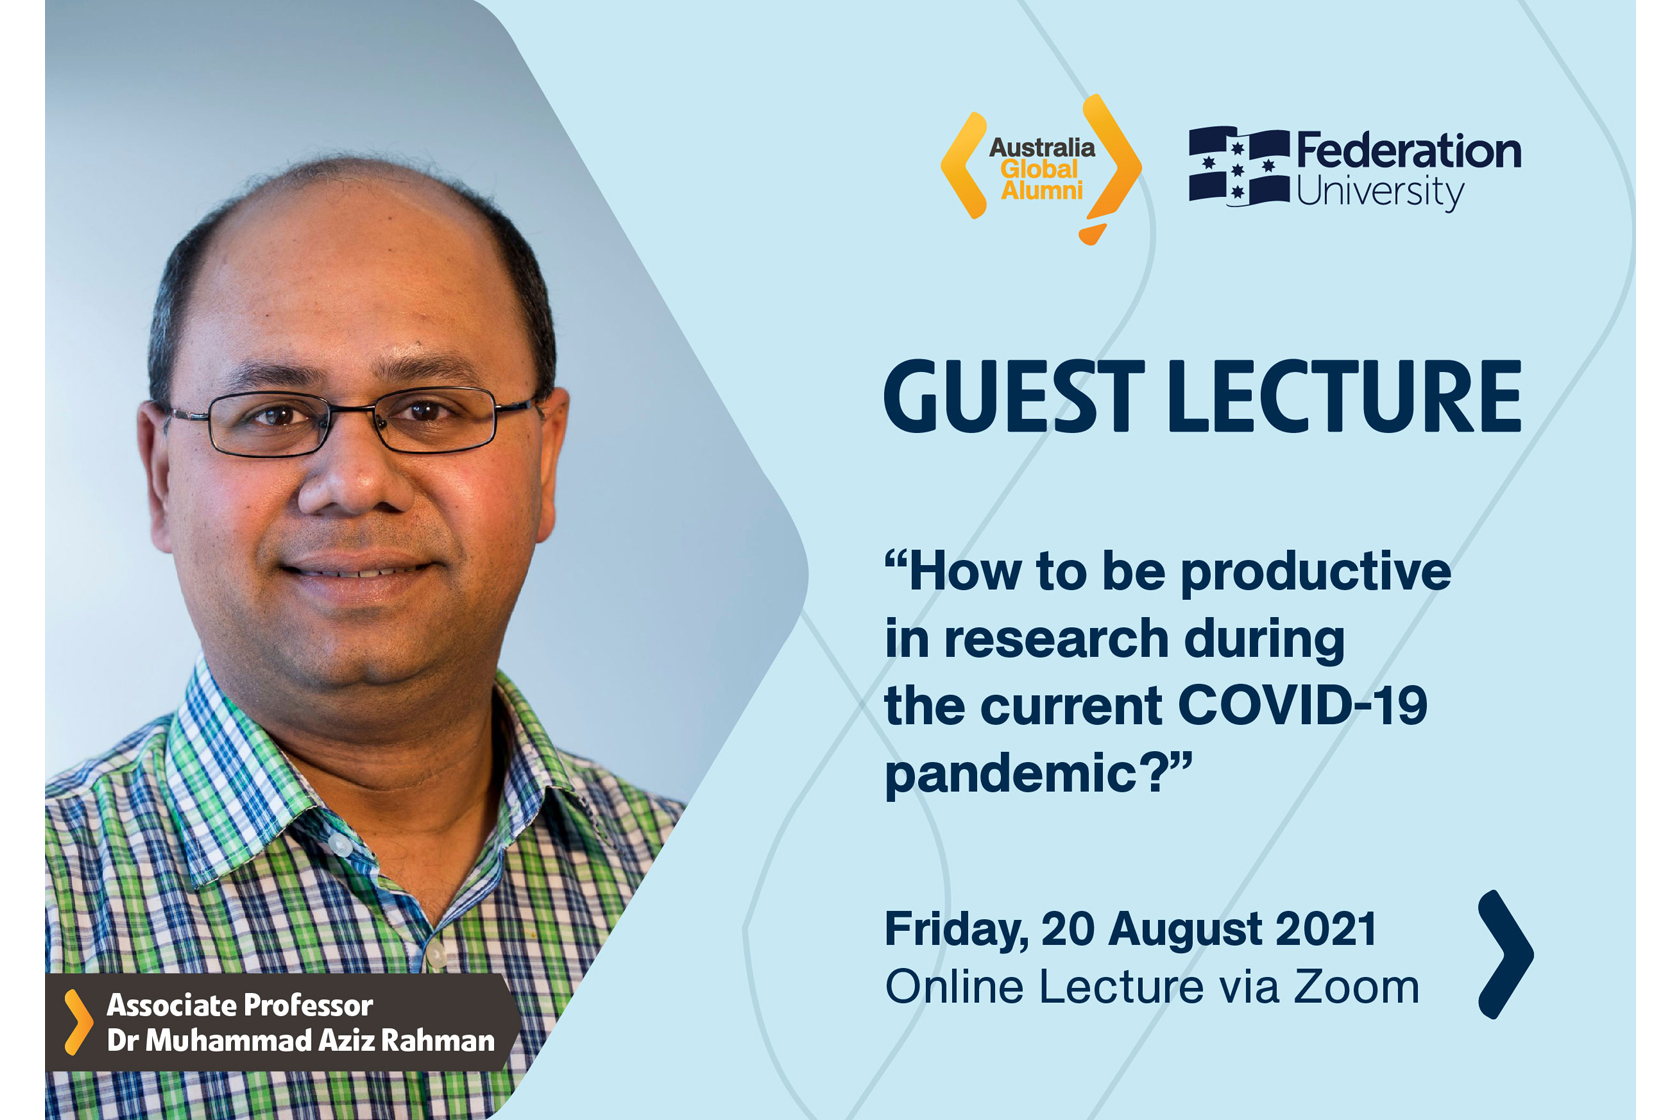 Join us in the Guest Lecture on How to be productive in research during the current COVID-19 pandemic?